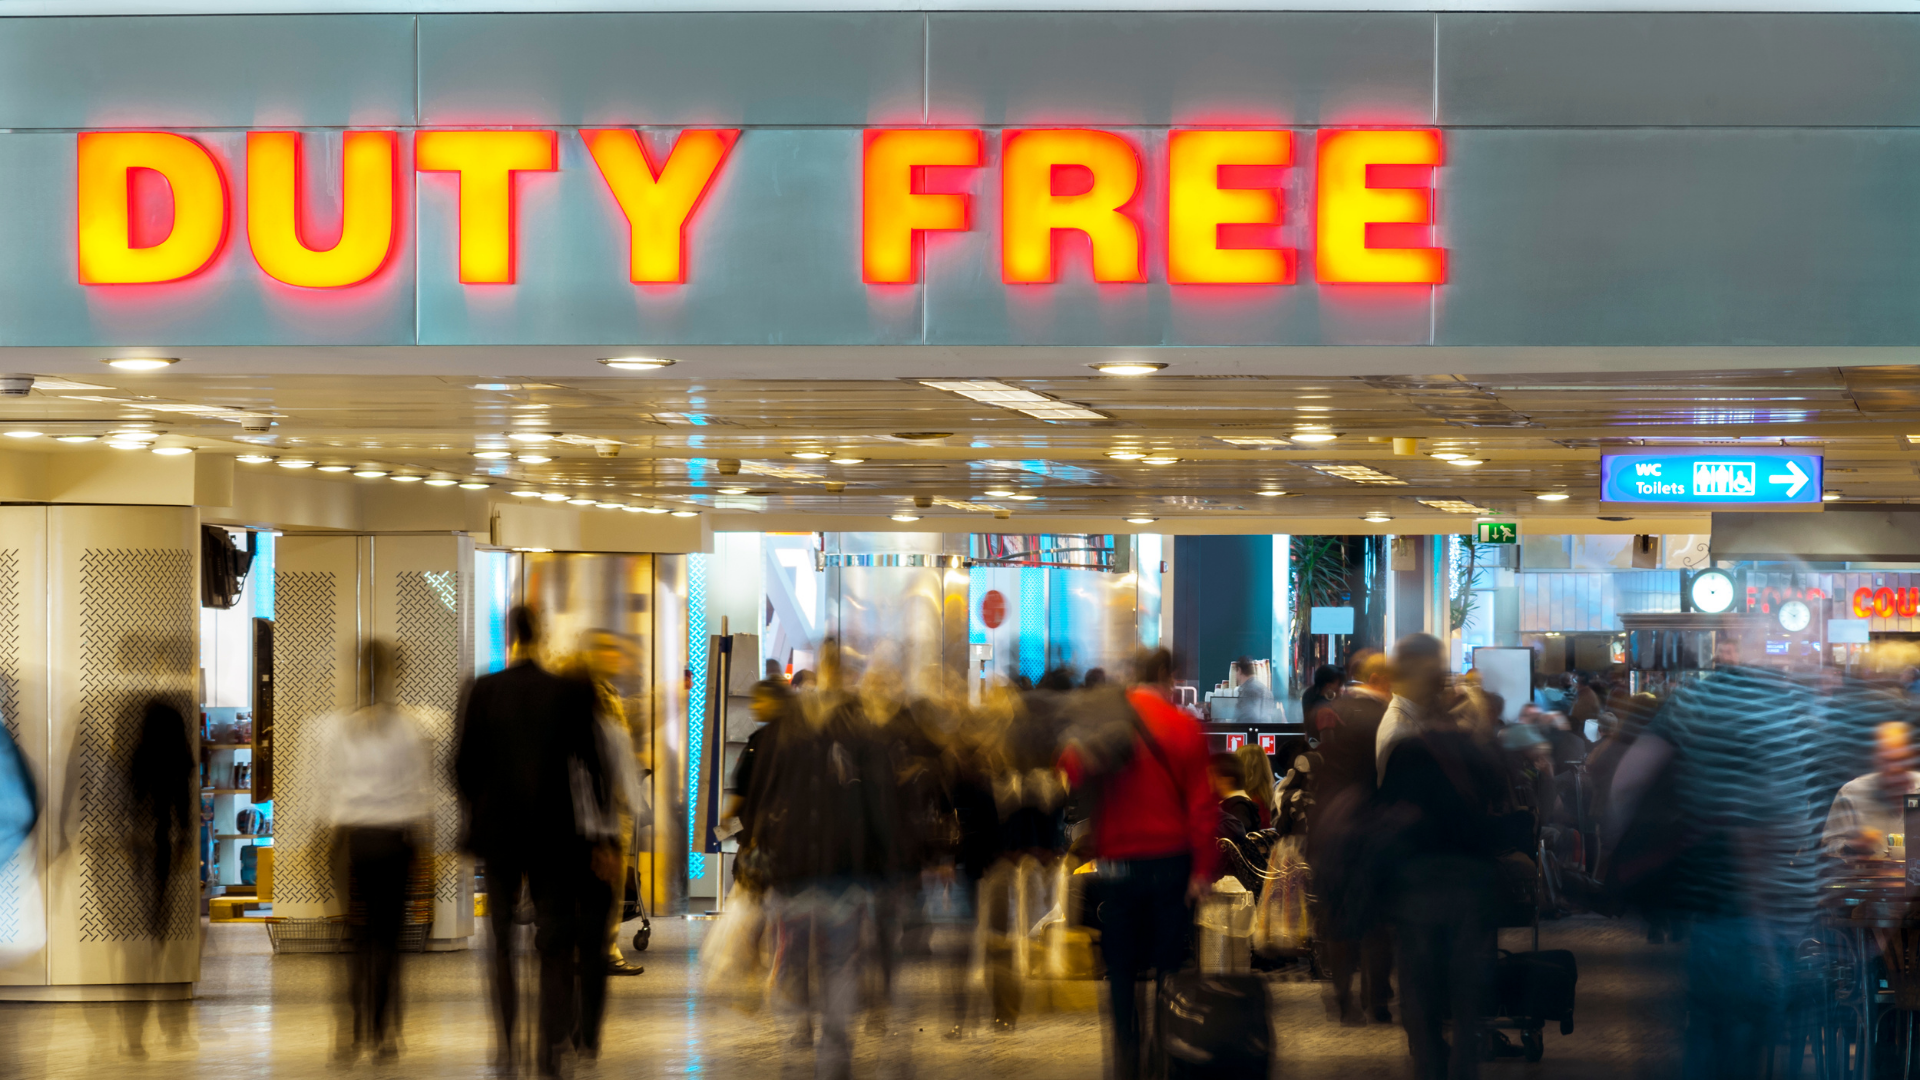 5 Great Duty Free Purchases to Make in An Airport